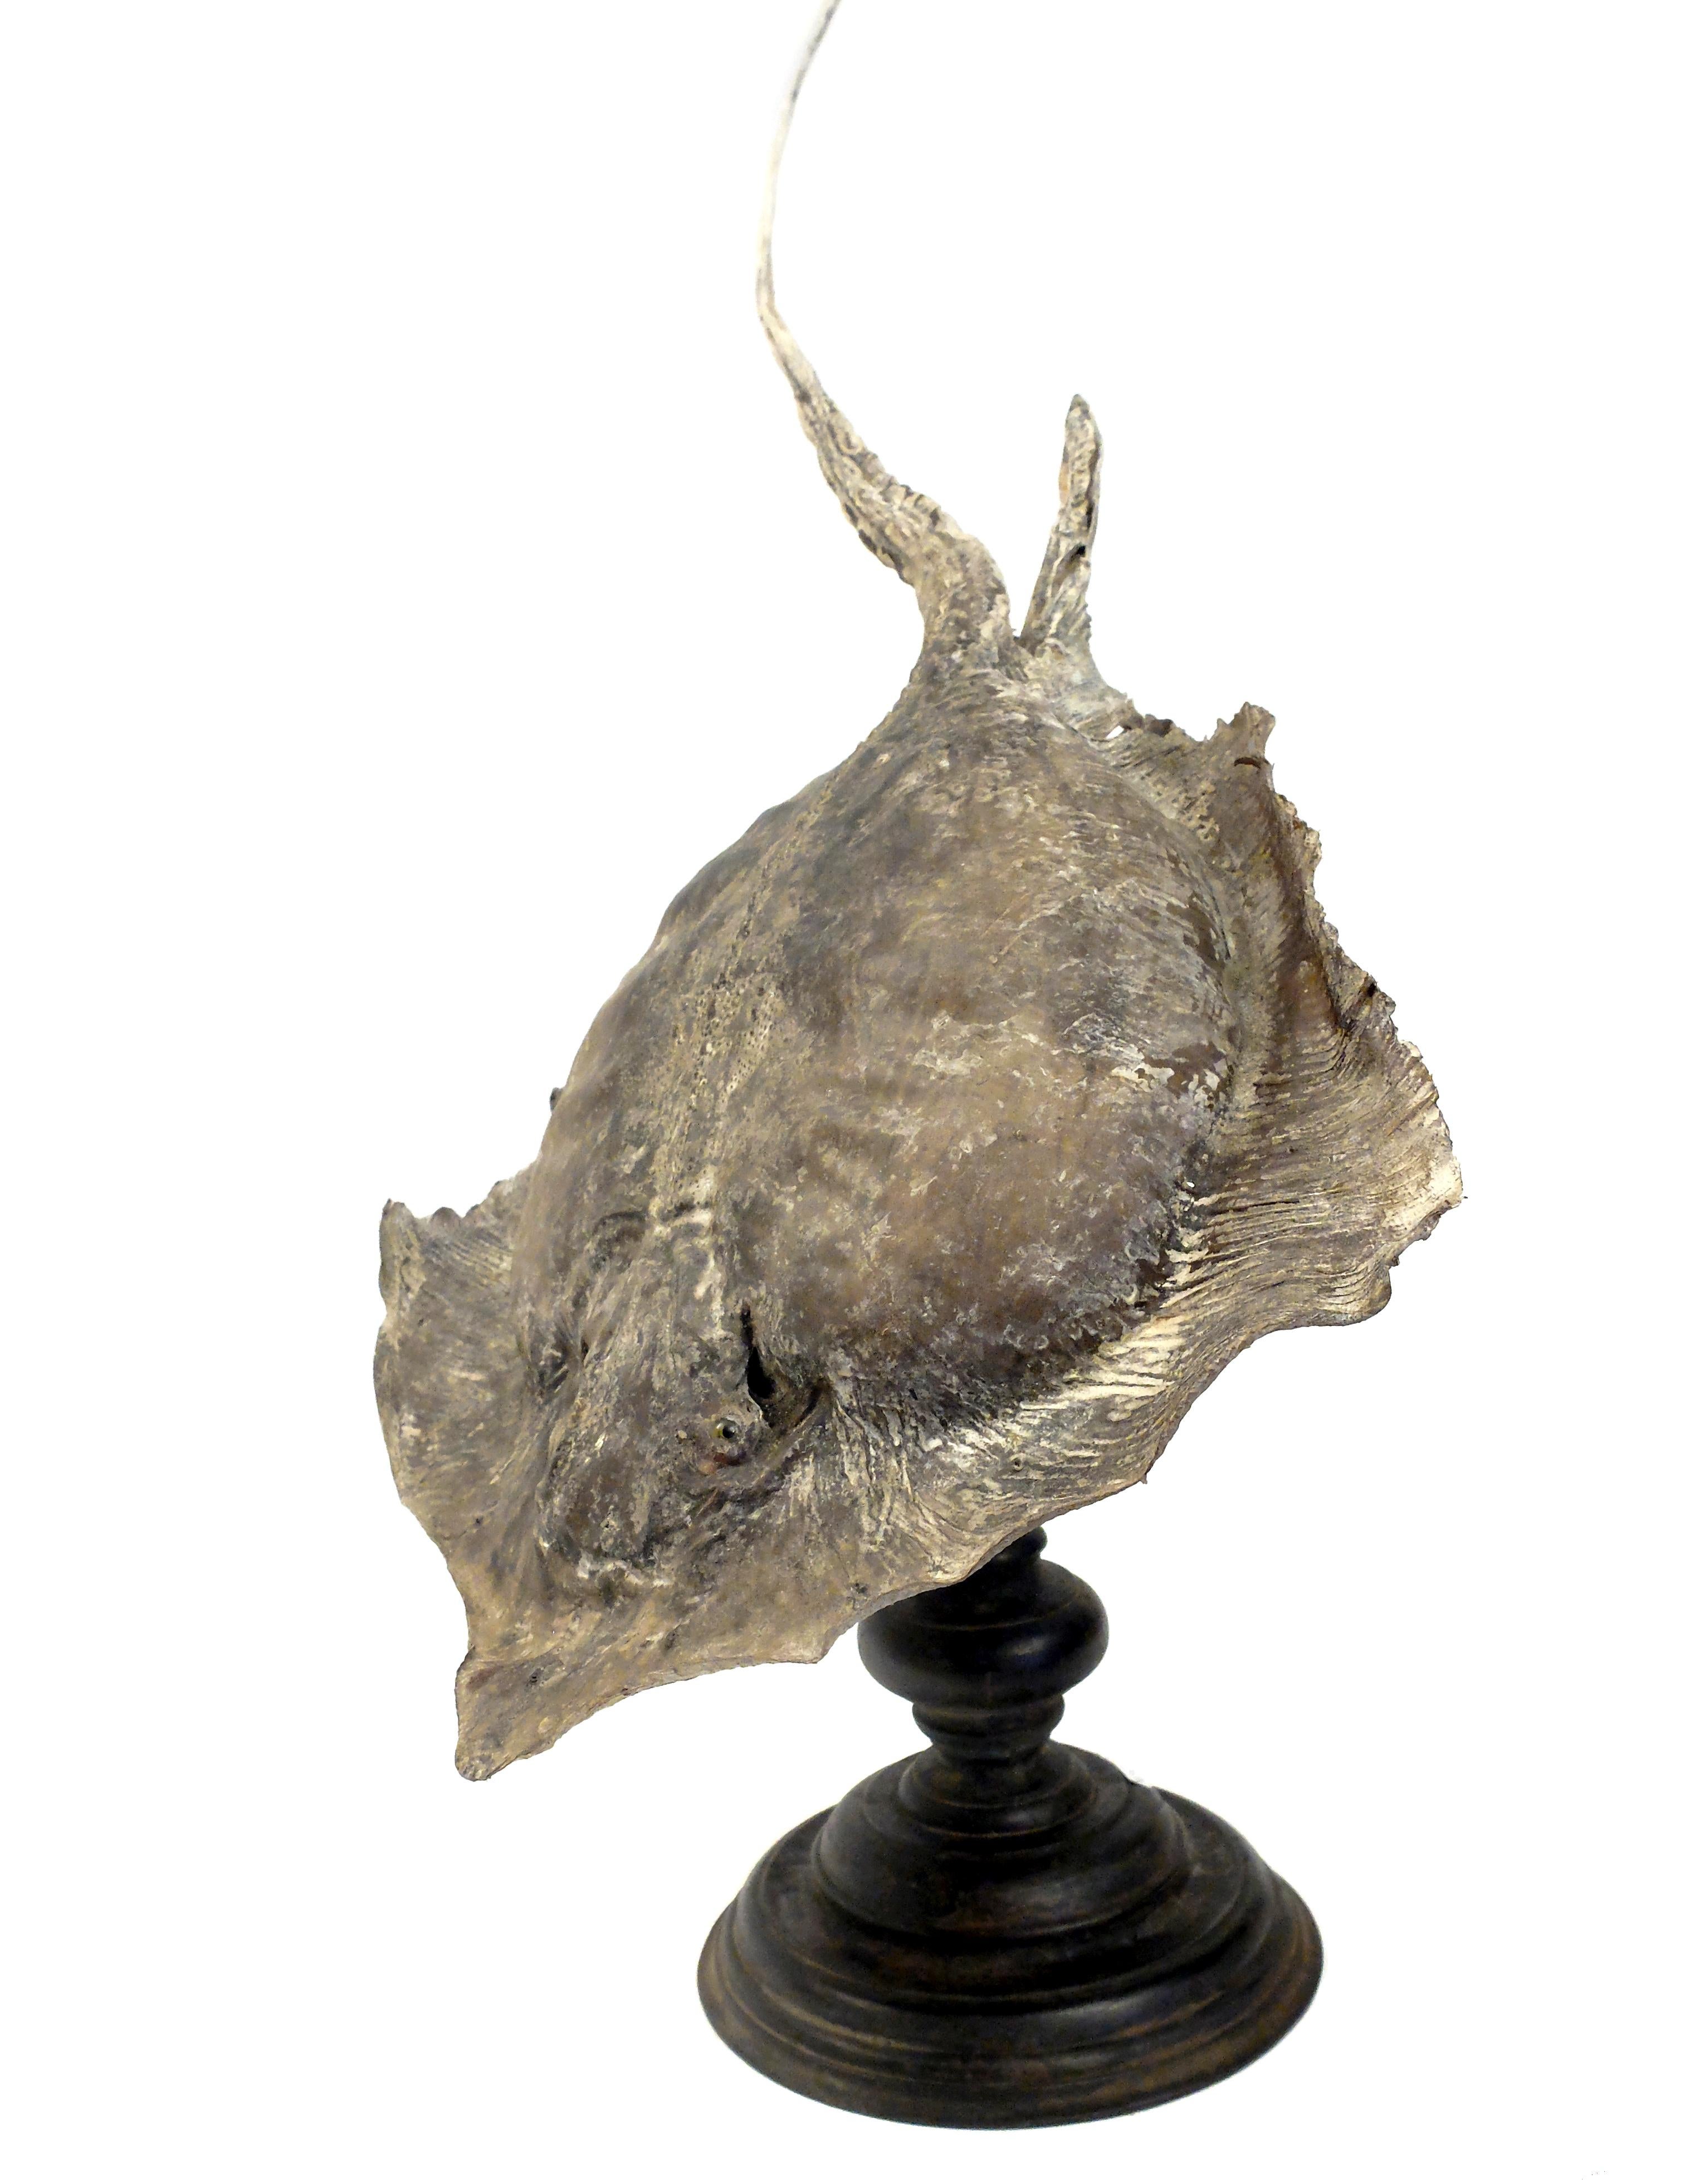 Mid-19th Century 19th Century Wunderkammer Marine Natural Taxodermie Specimen of a Stingray